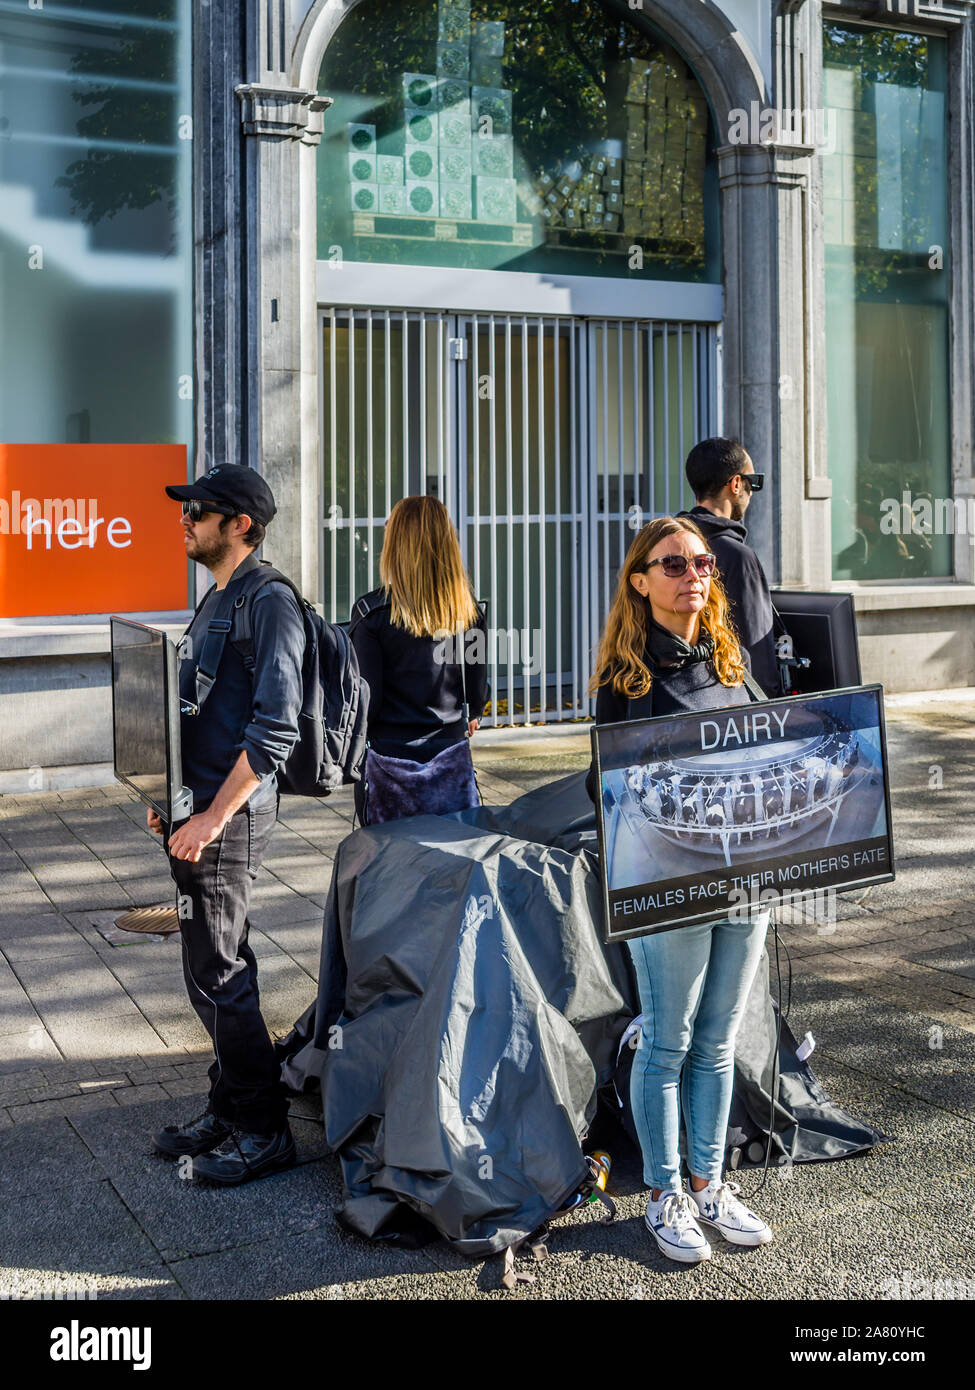 Silent protest about veganism and animal rights - Antwerp, Belgium. Stock Photo